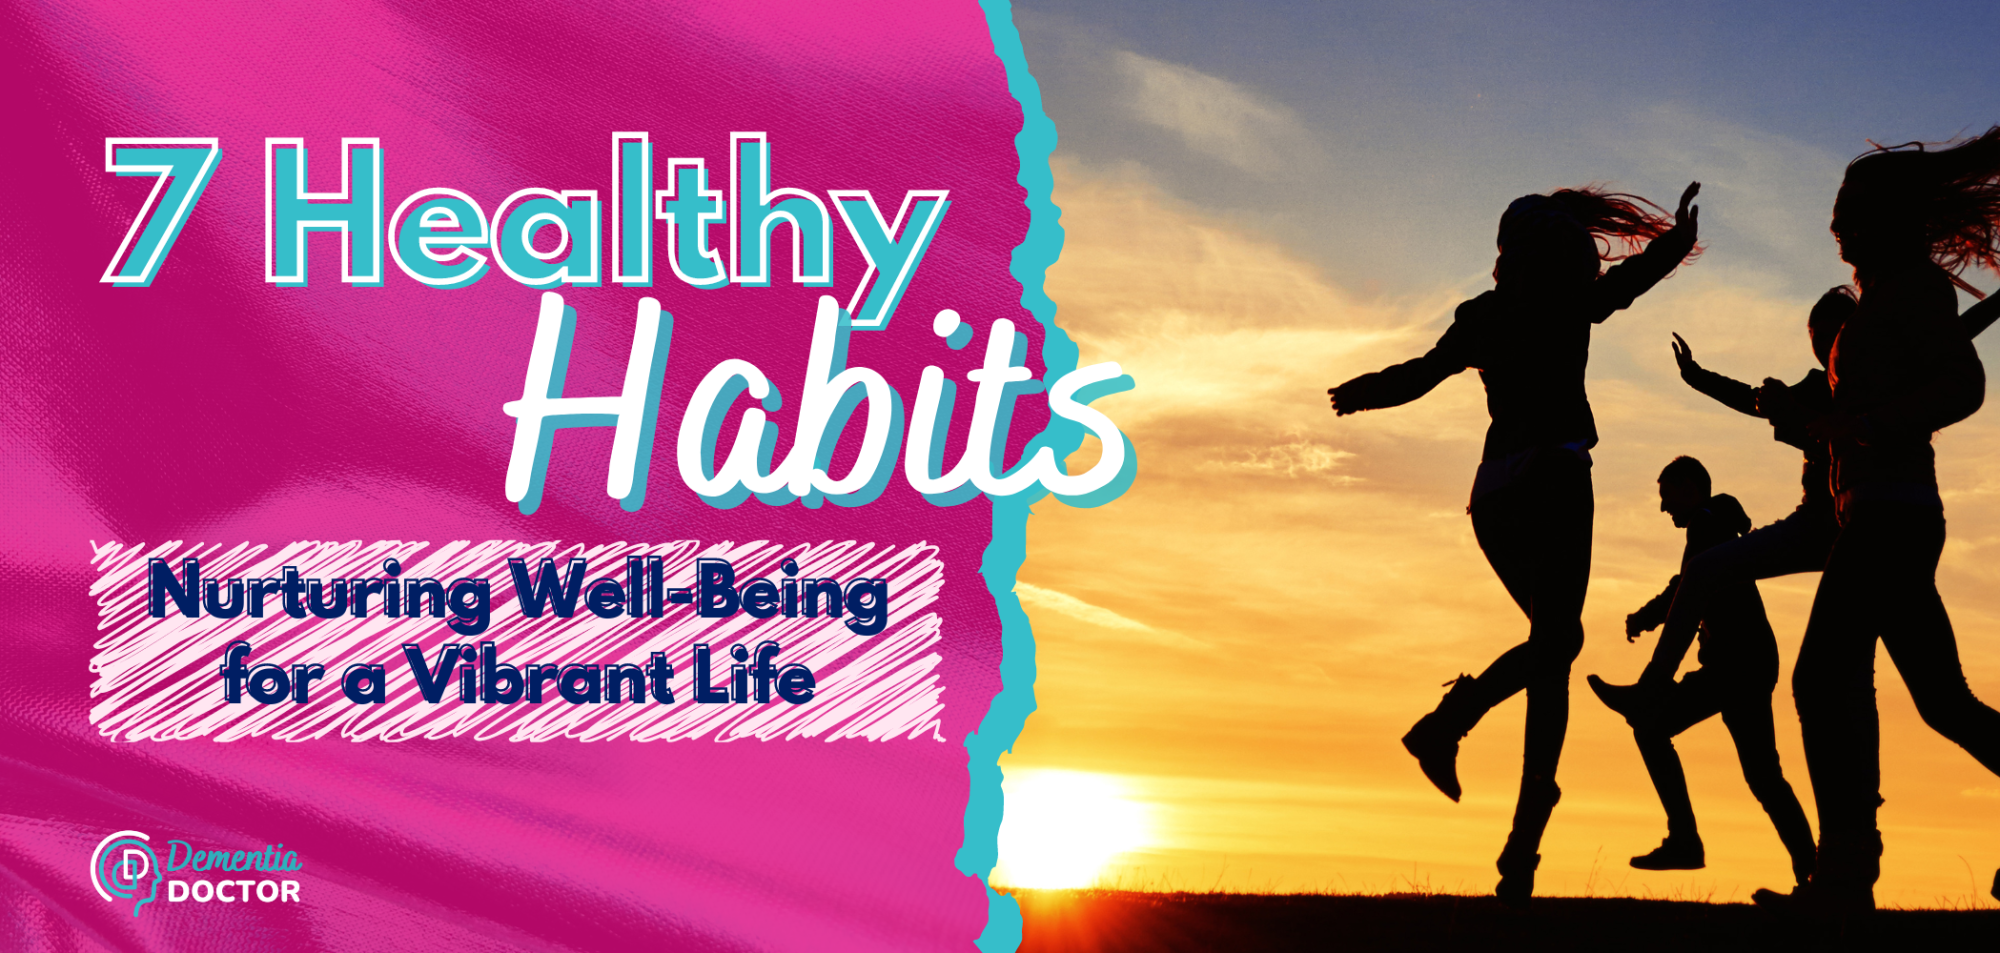 7 Healthy Habits Nurturing well-being for a vibrant life